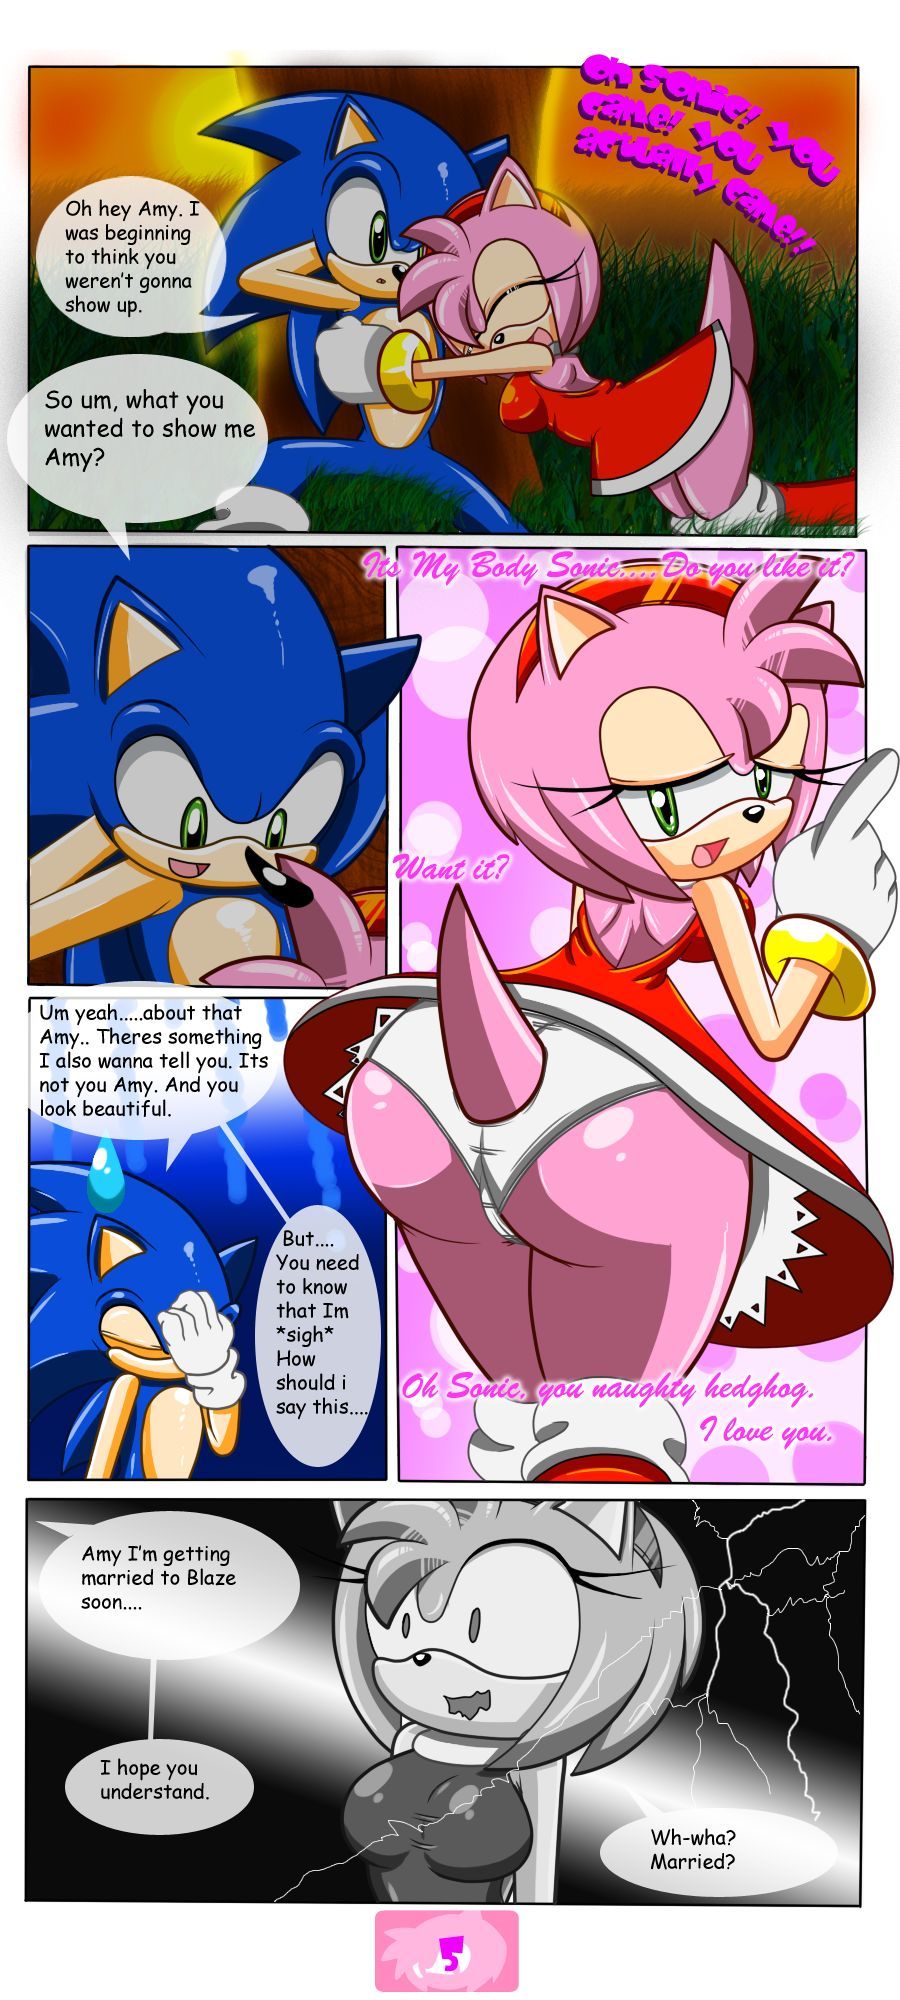 A Sweat Rose Sonic the Hedgehog by Nobody147 page 7